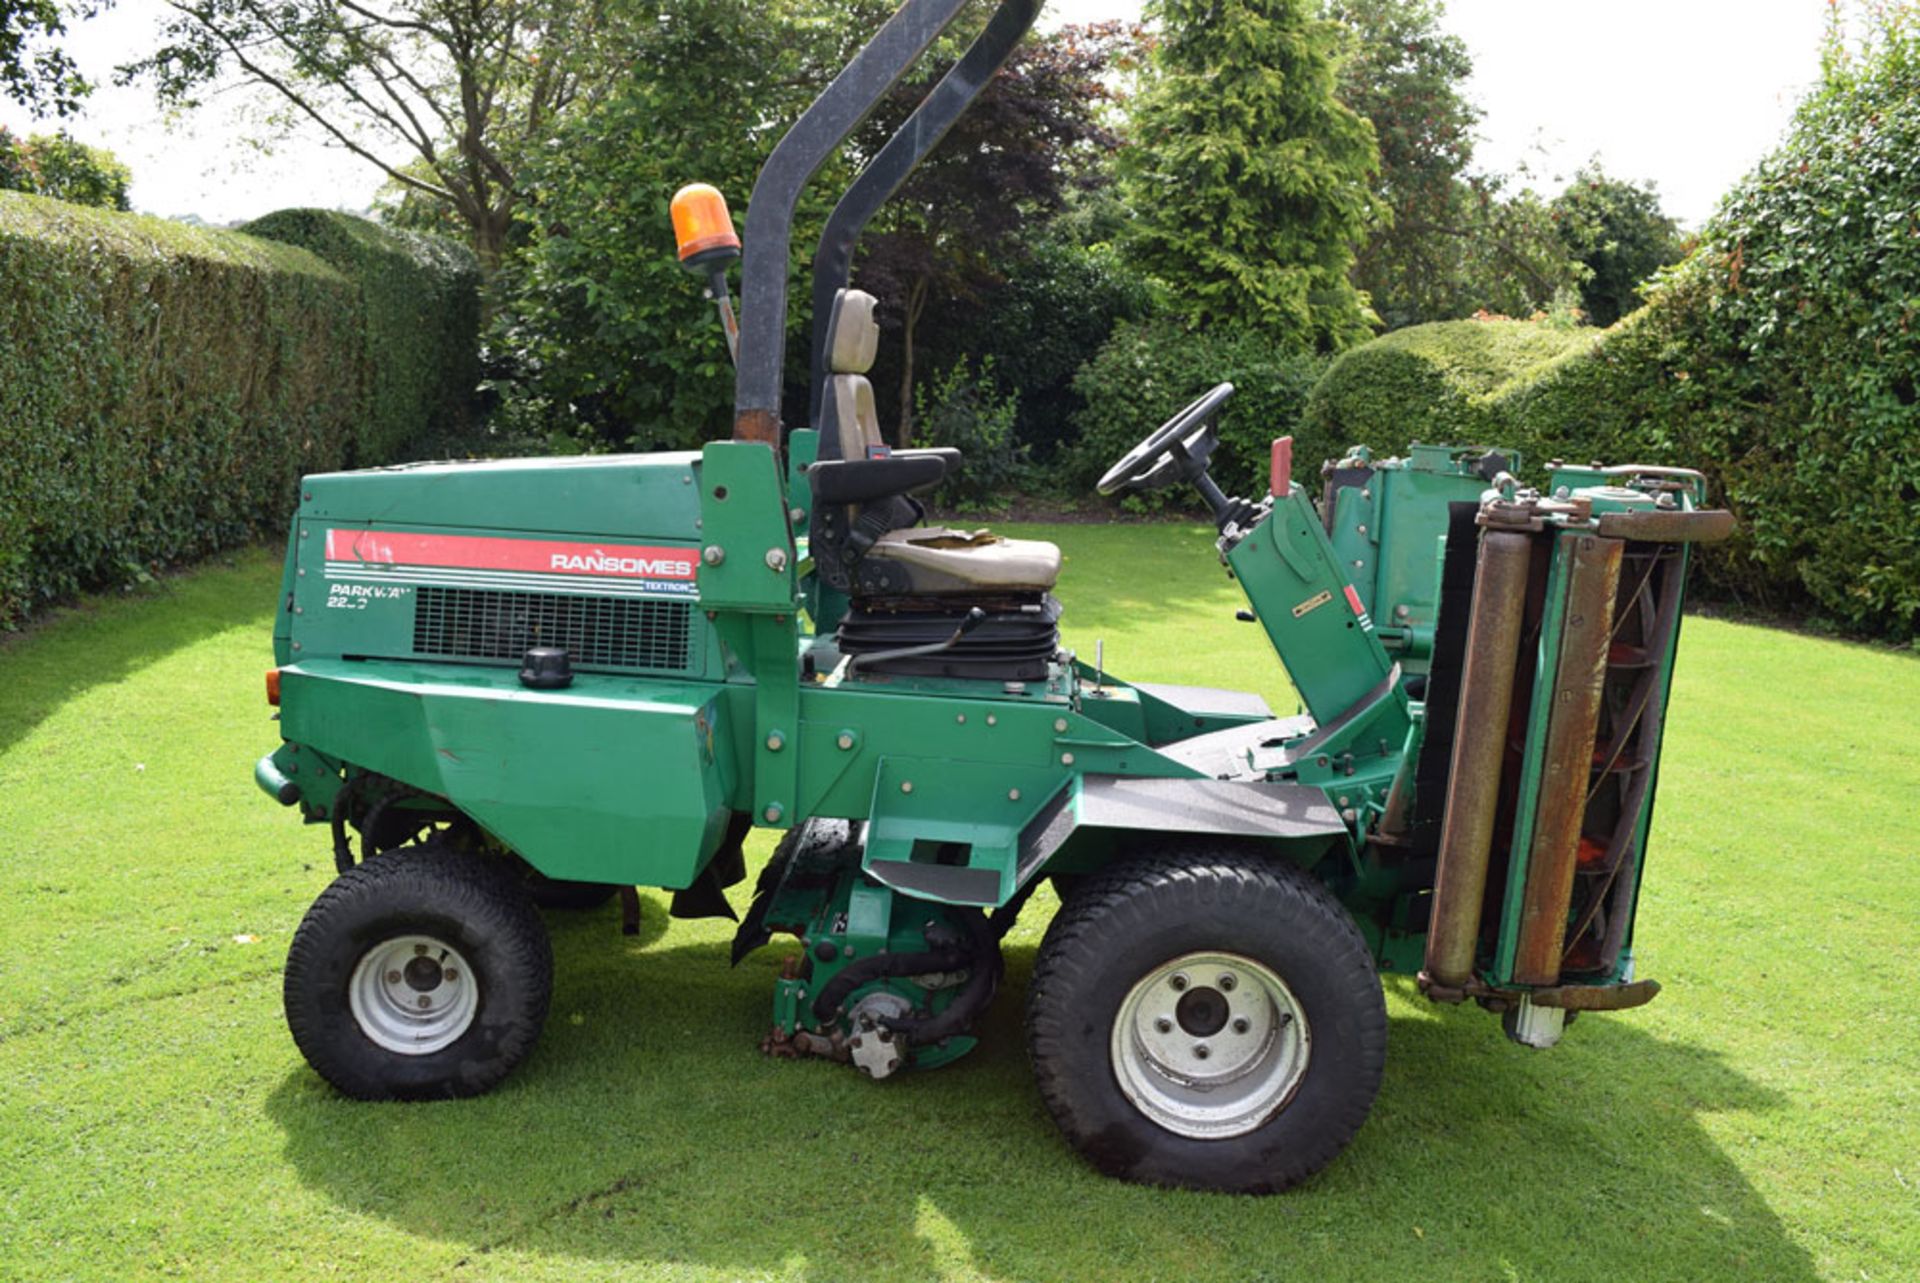 2003 Ransomes Parkway 2250 Plus Ride On Cylinder Mower - Image 2 of 3